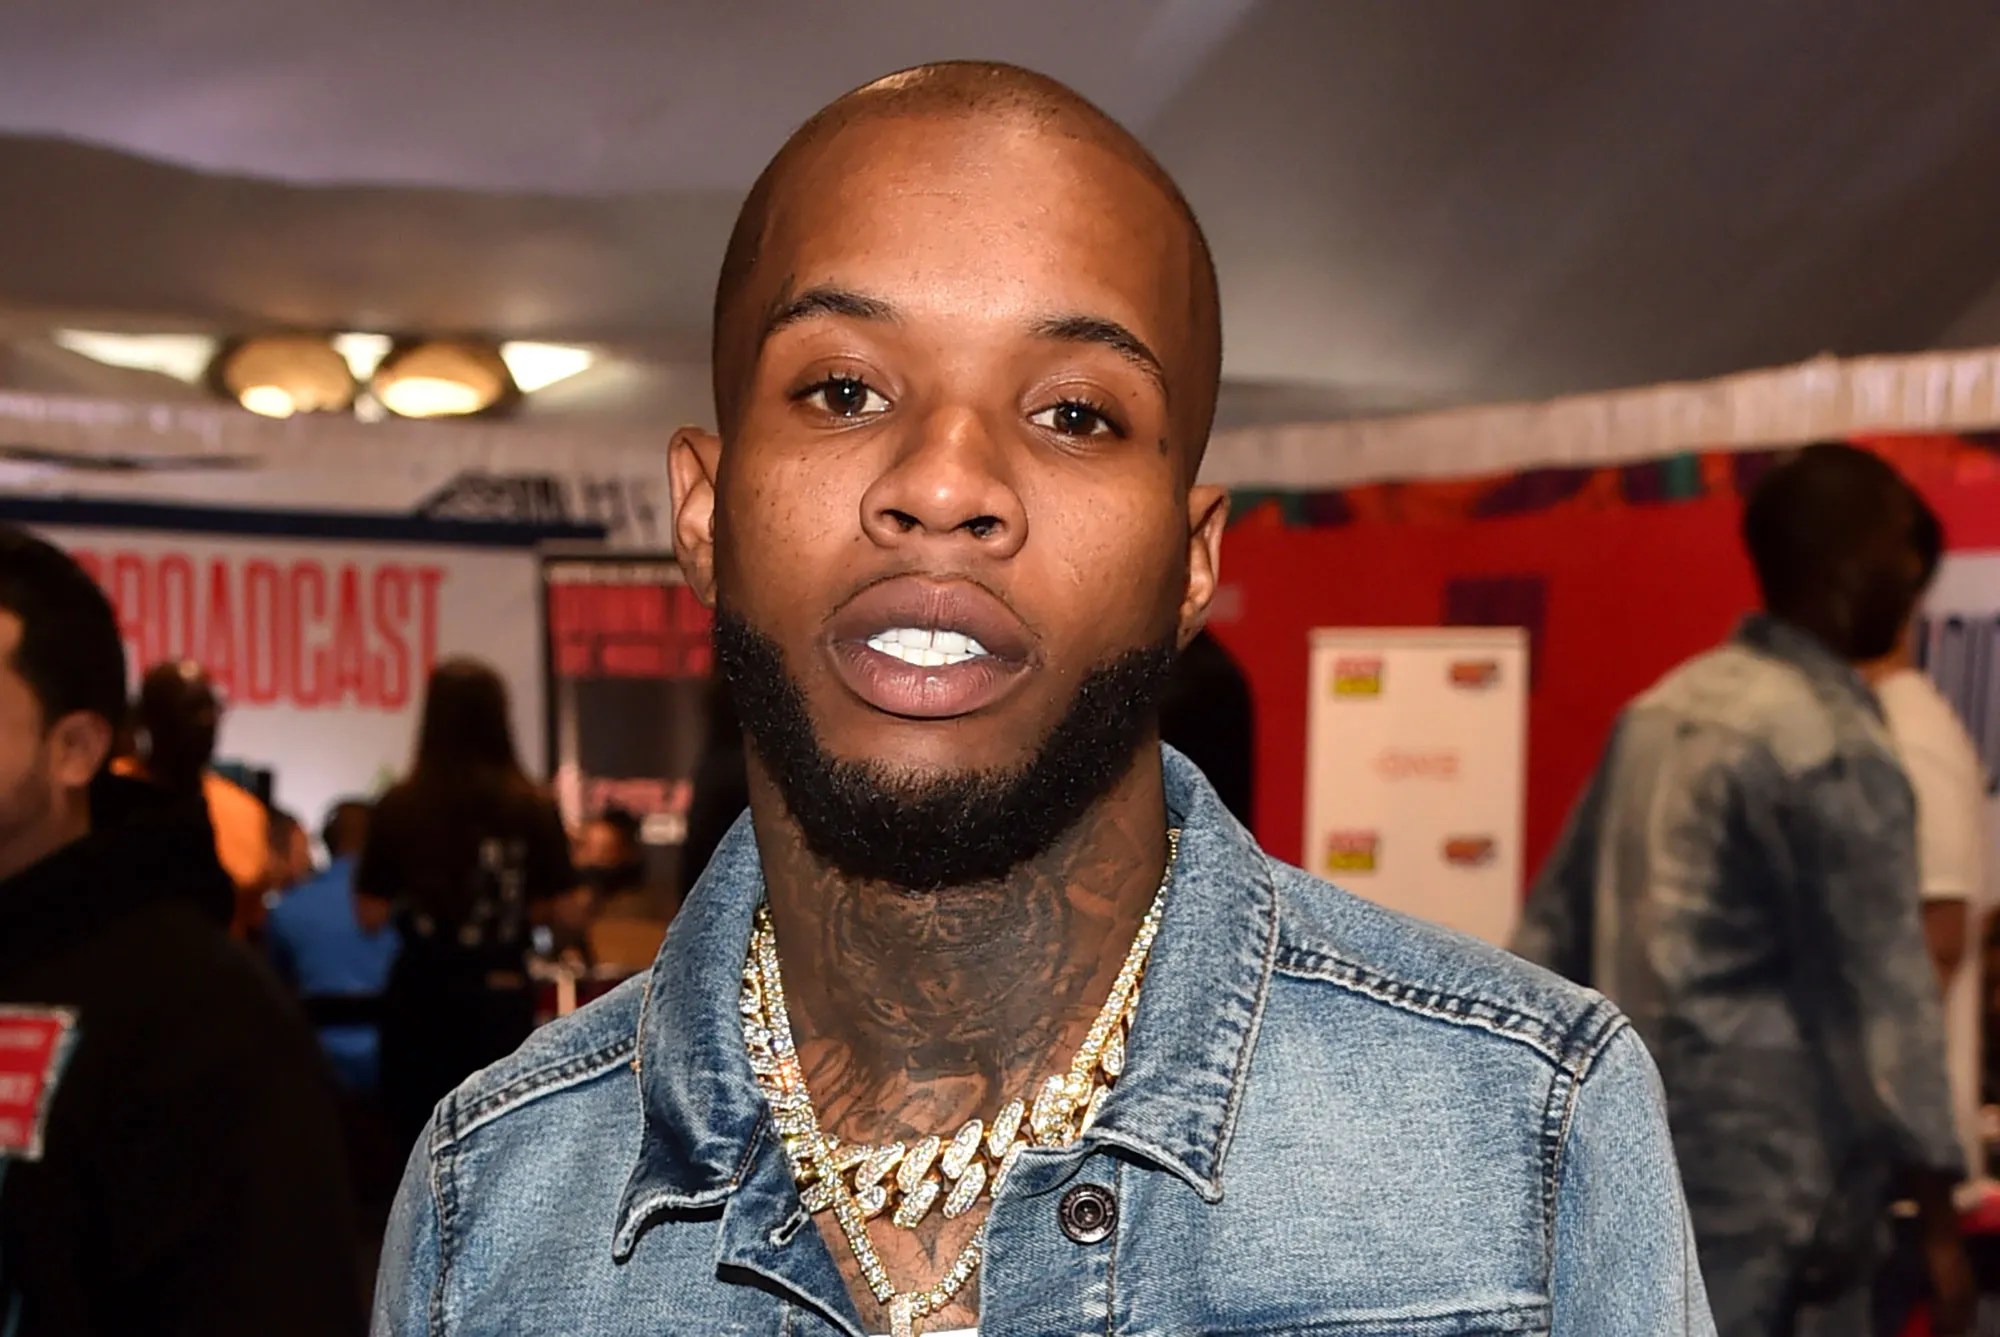 Tory Lanez Shares New Song From His Jail Cell Office News365.co.za